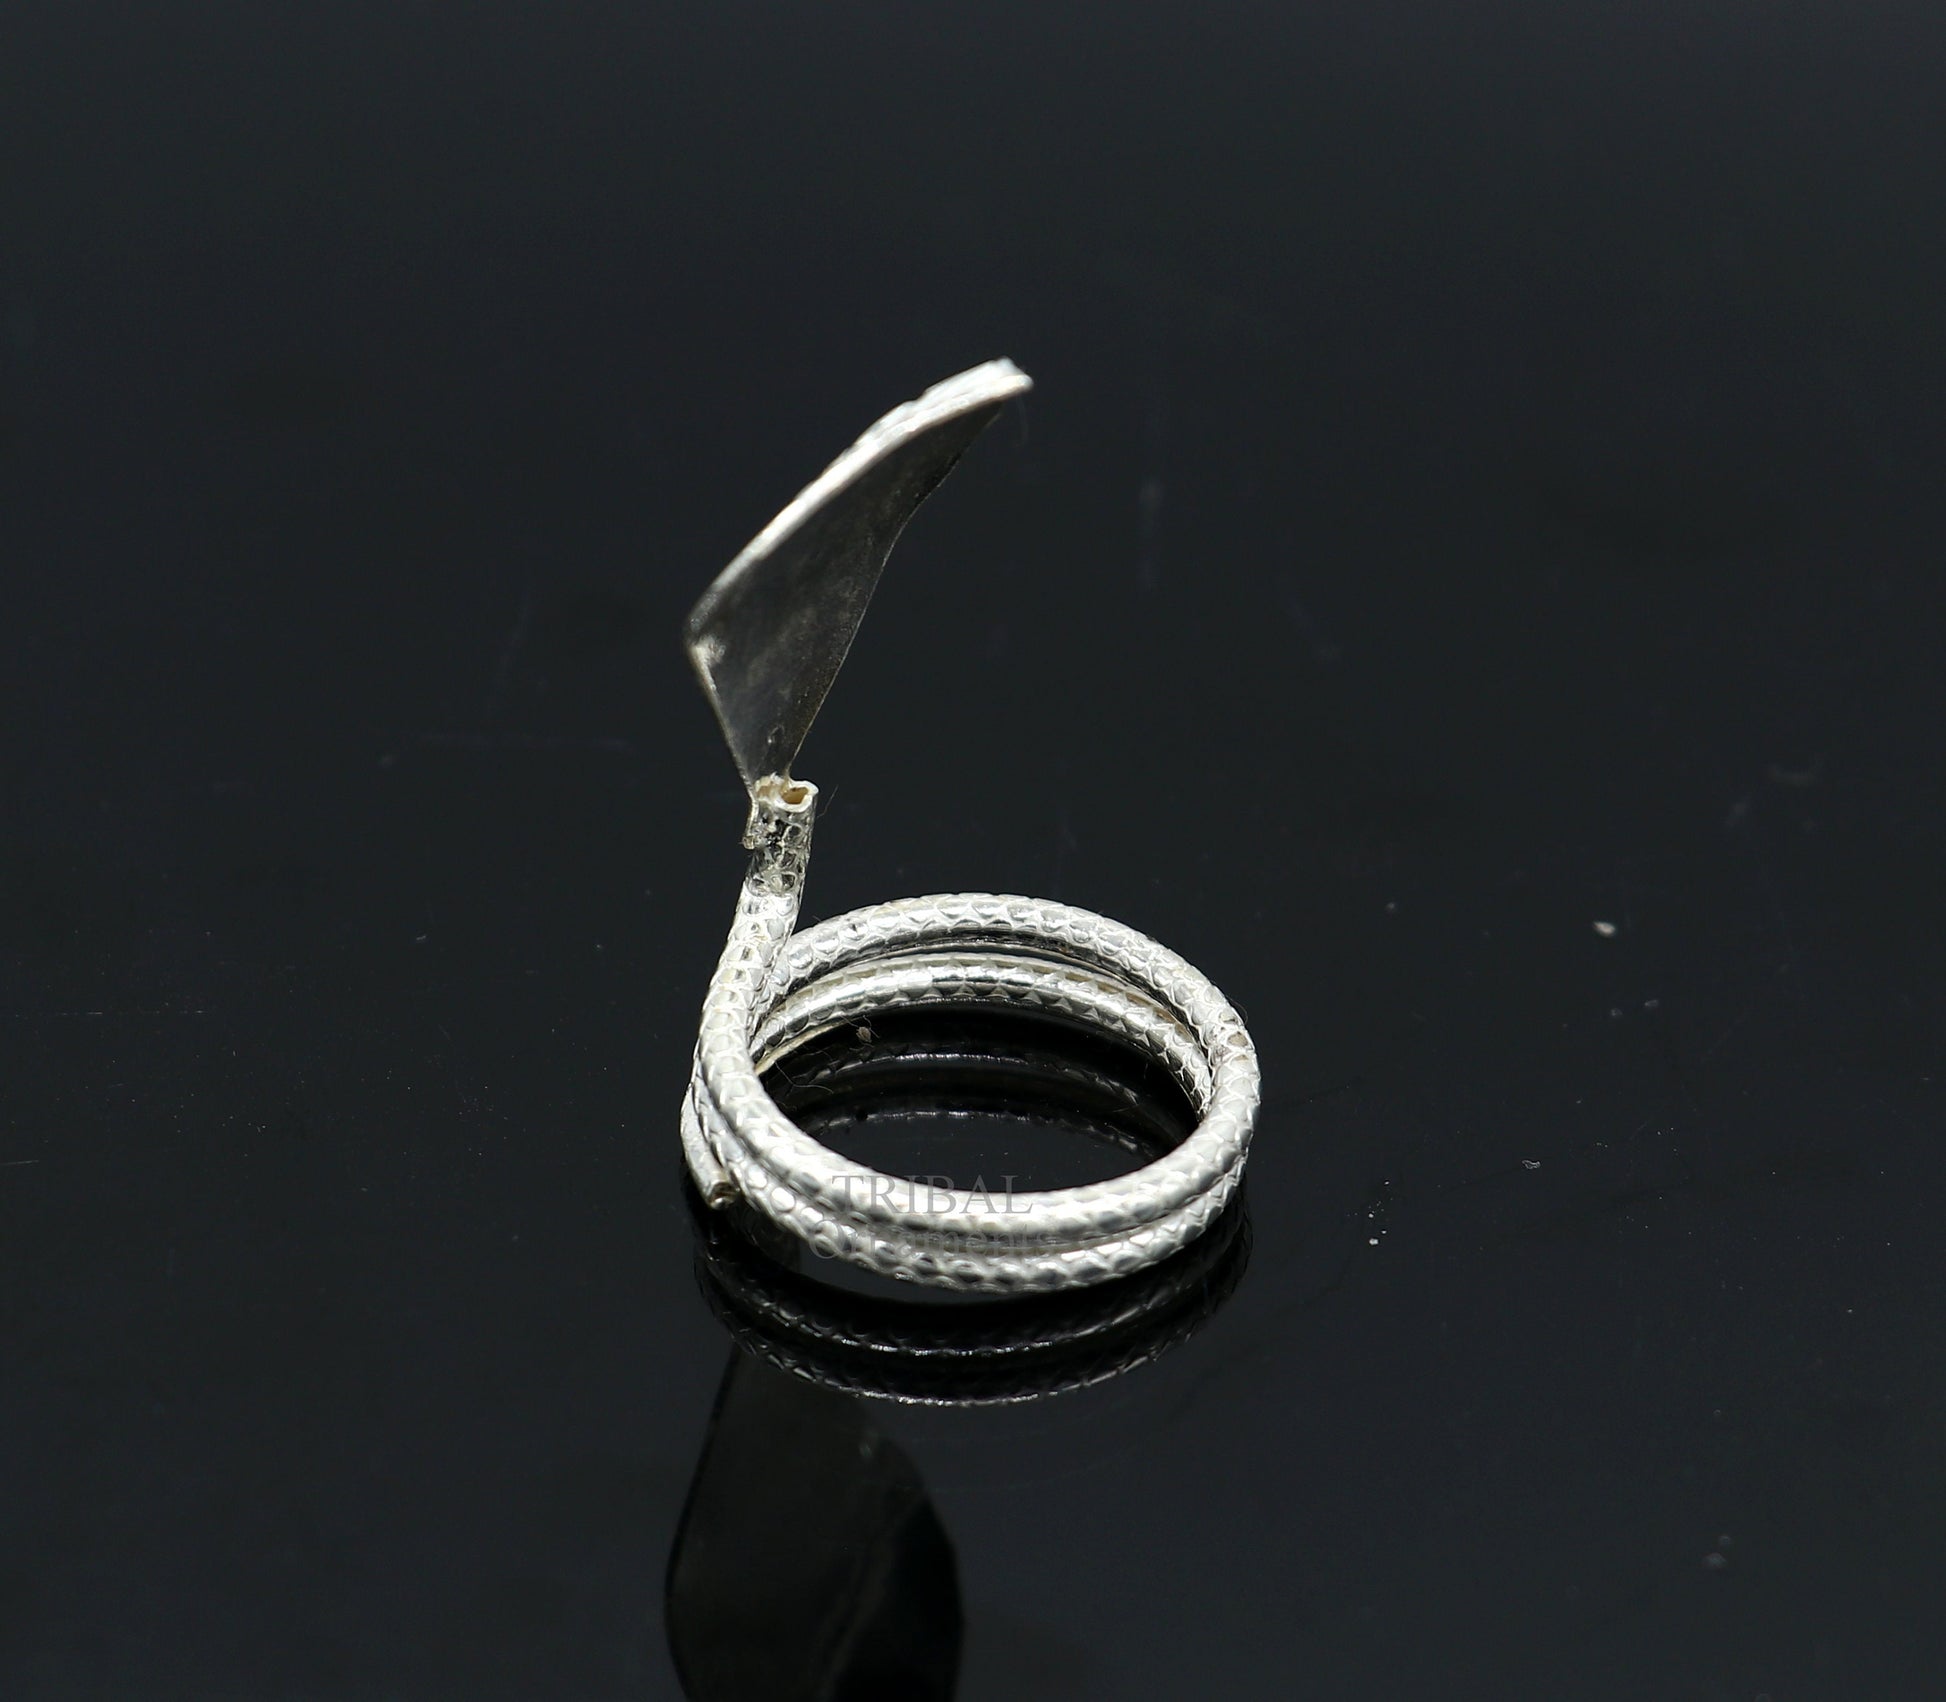 Divine Shiva Snake sterling silver handmade style mini snake or shiva snake for puja or worshipping, solid Diwali puja article su719 - TRIBAL ORNAMENTS